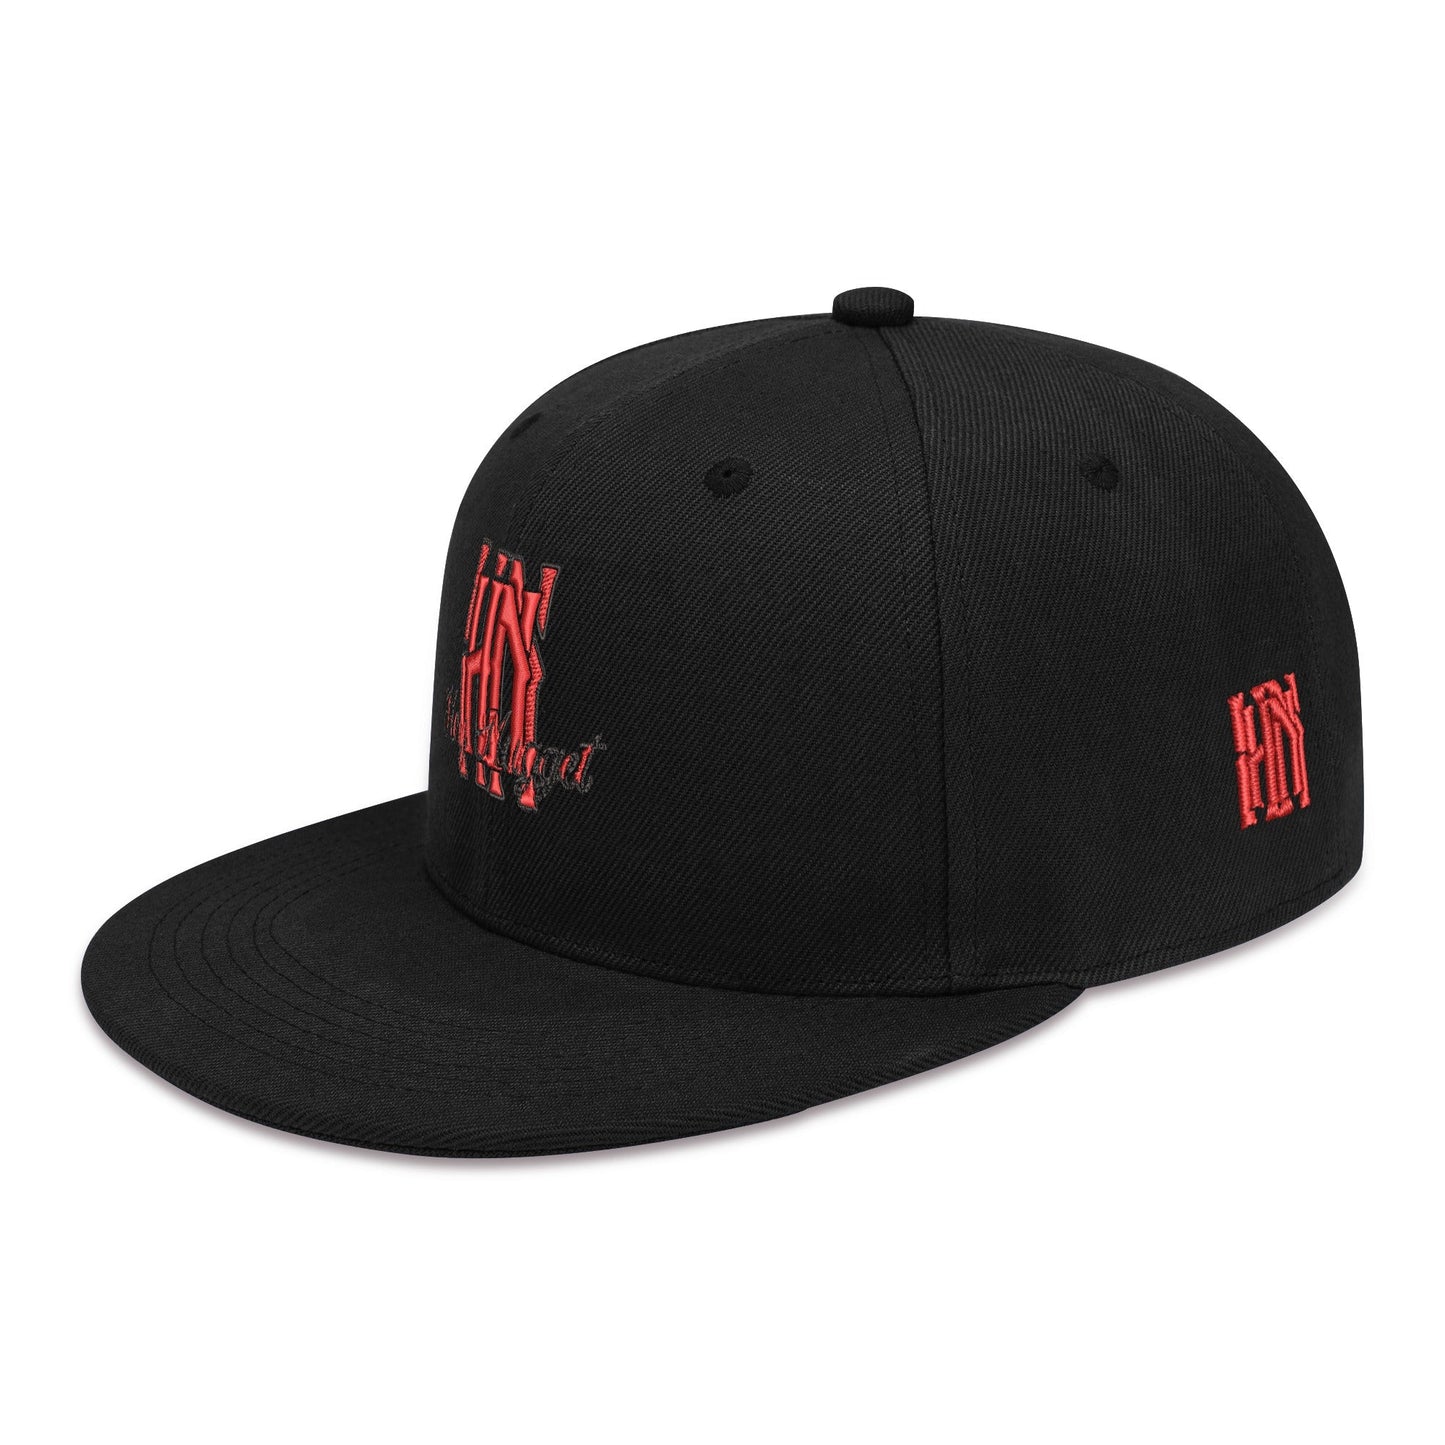 Stand out  with the  HN Embroidered Hip-hop Hats  available at Hey Nugget. Grab yours today!